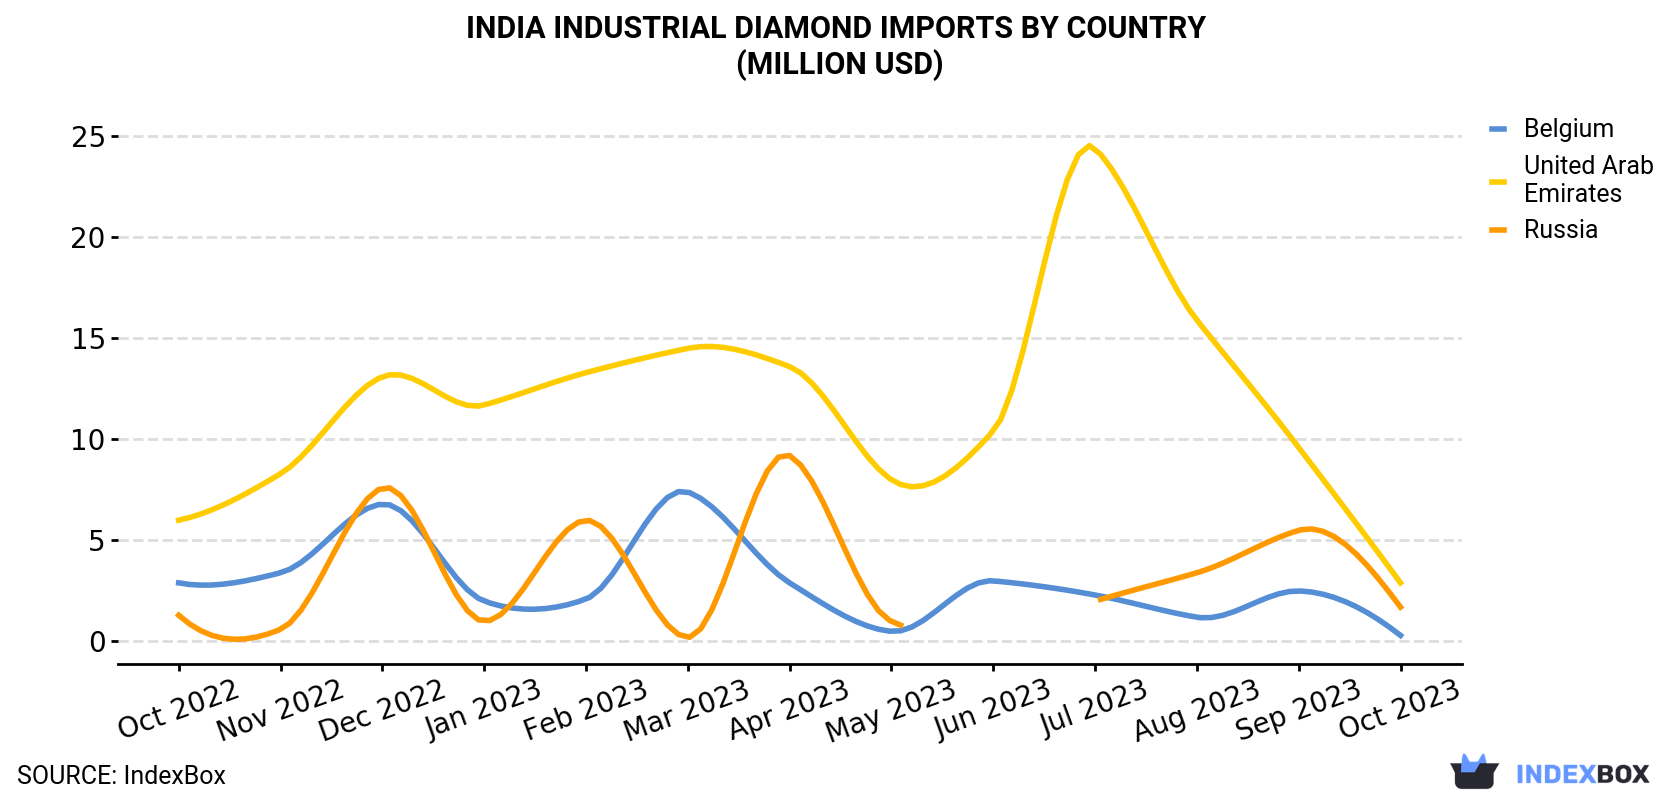 India Industrial Diamond Imports By Country (Million USD)